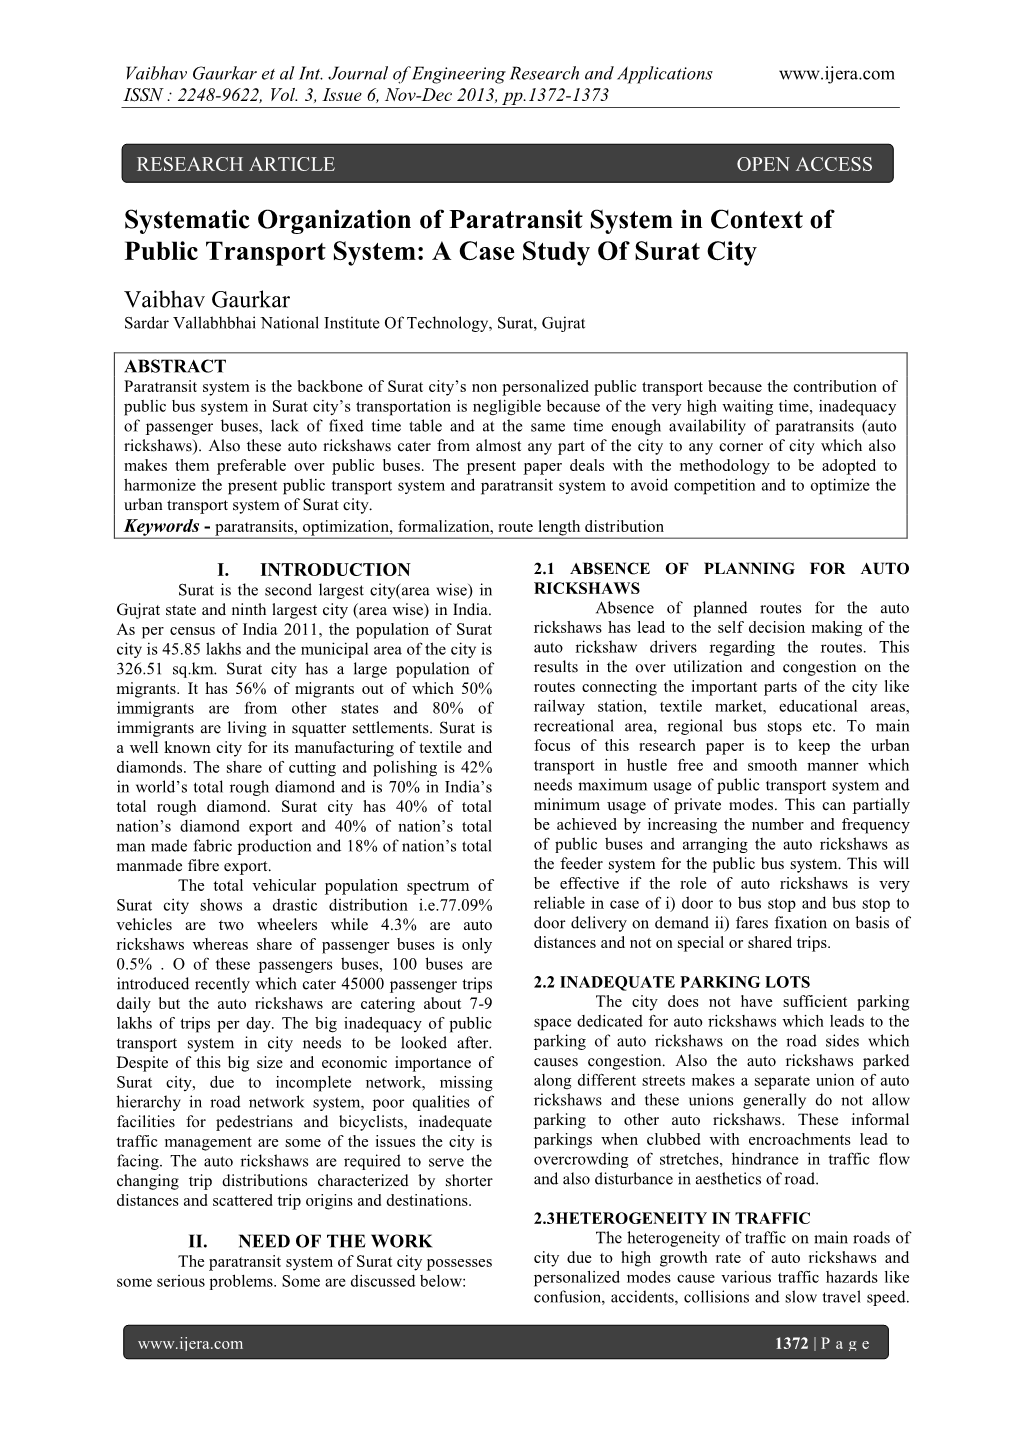 Systematic Organization of Paratransit System in Context of Public Transport System: a Case Study of Surat City